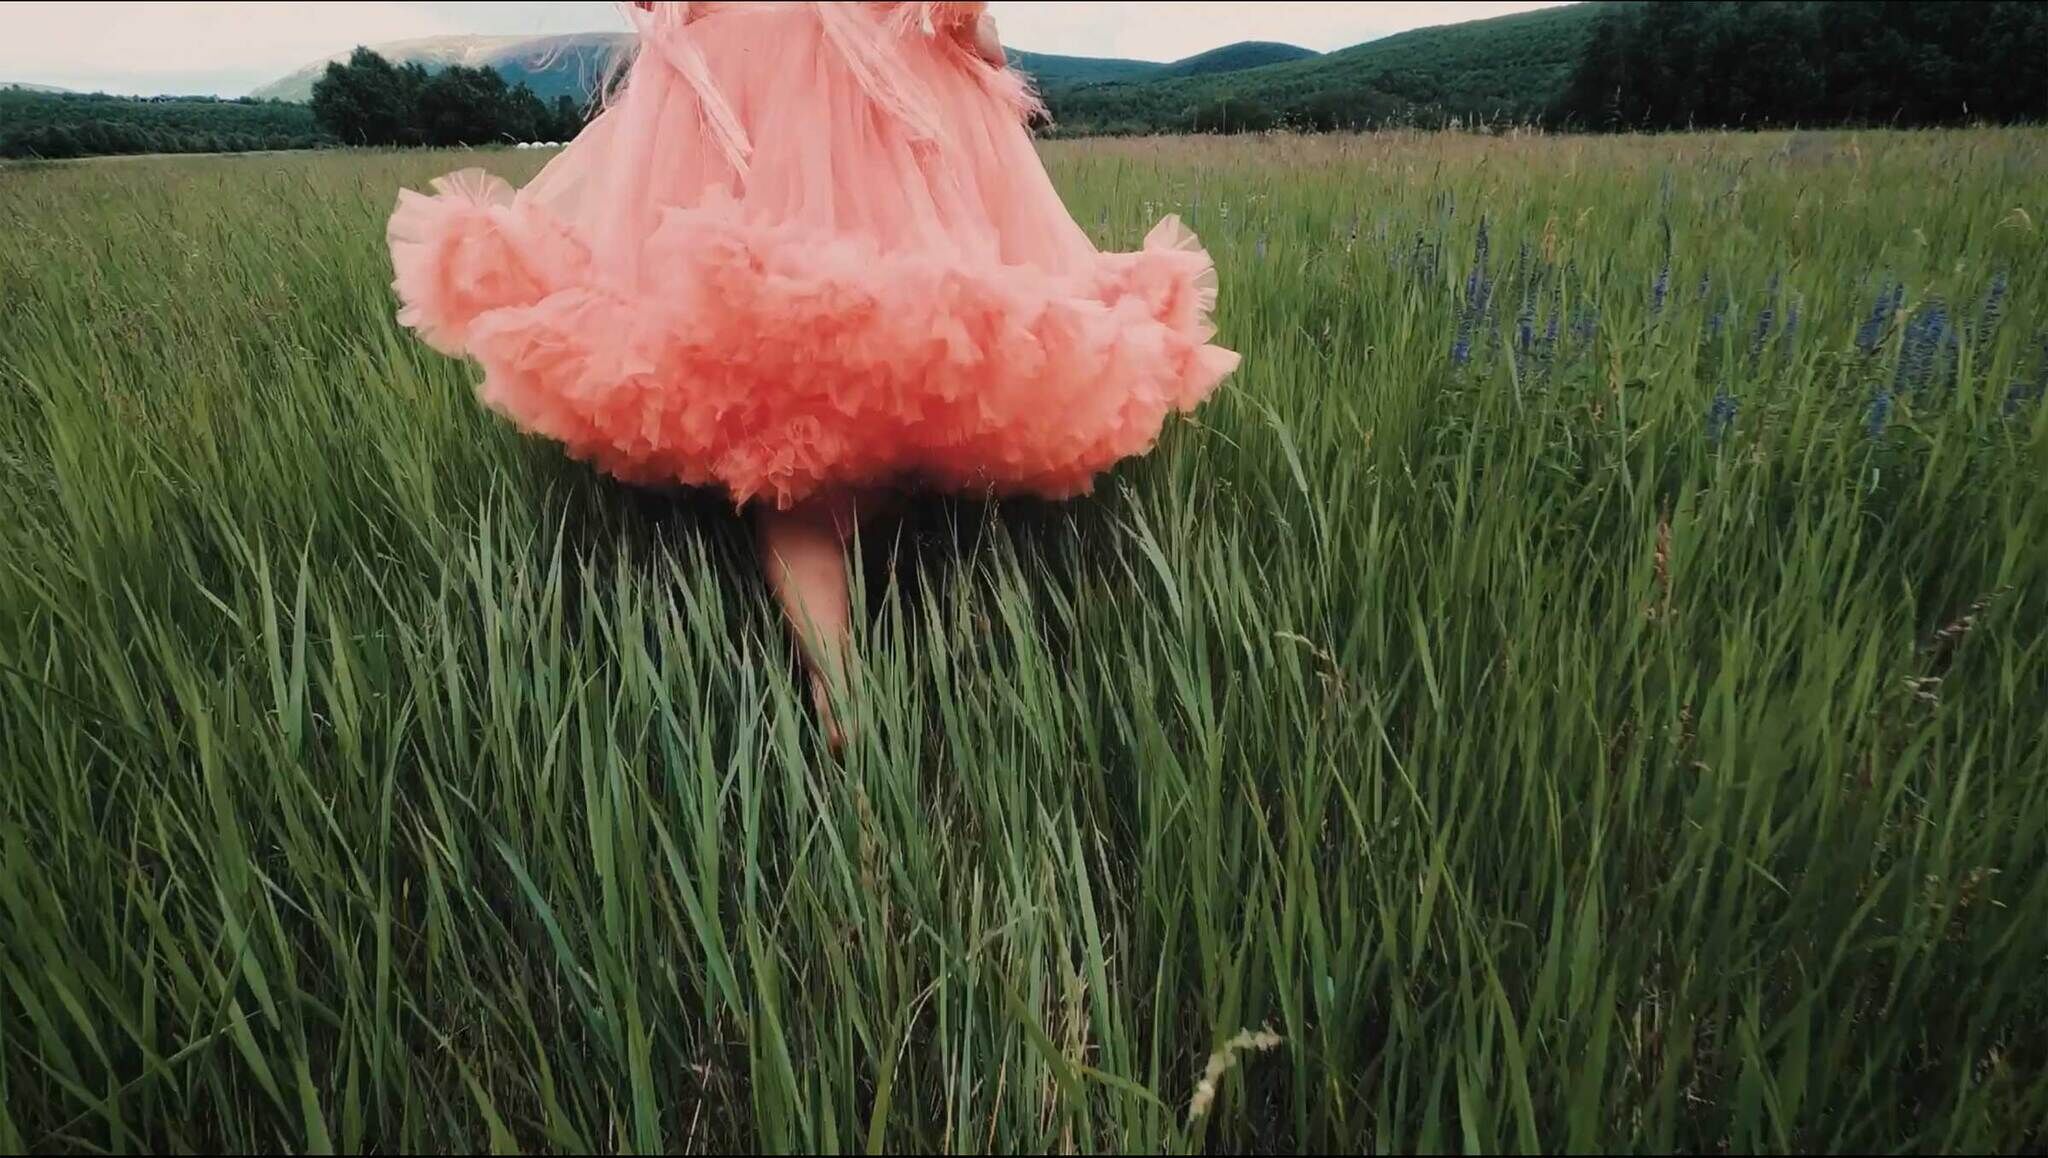 Person in a billowing peach dress mid-twirl in a lush green field with distant hills.